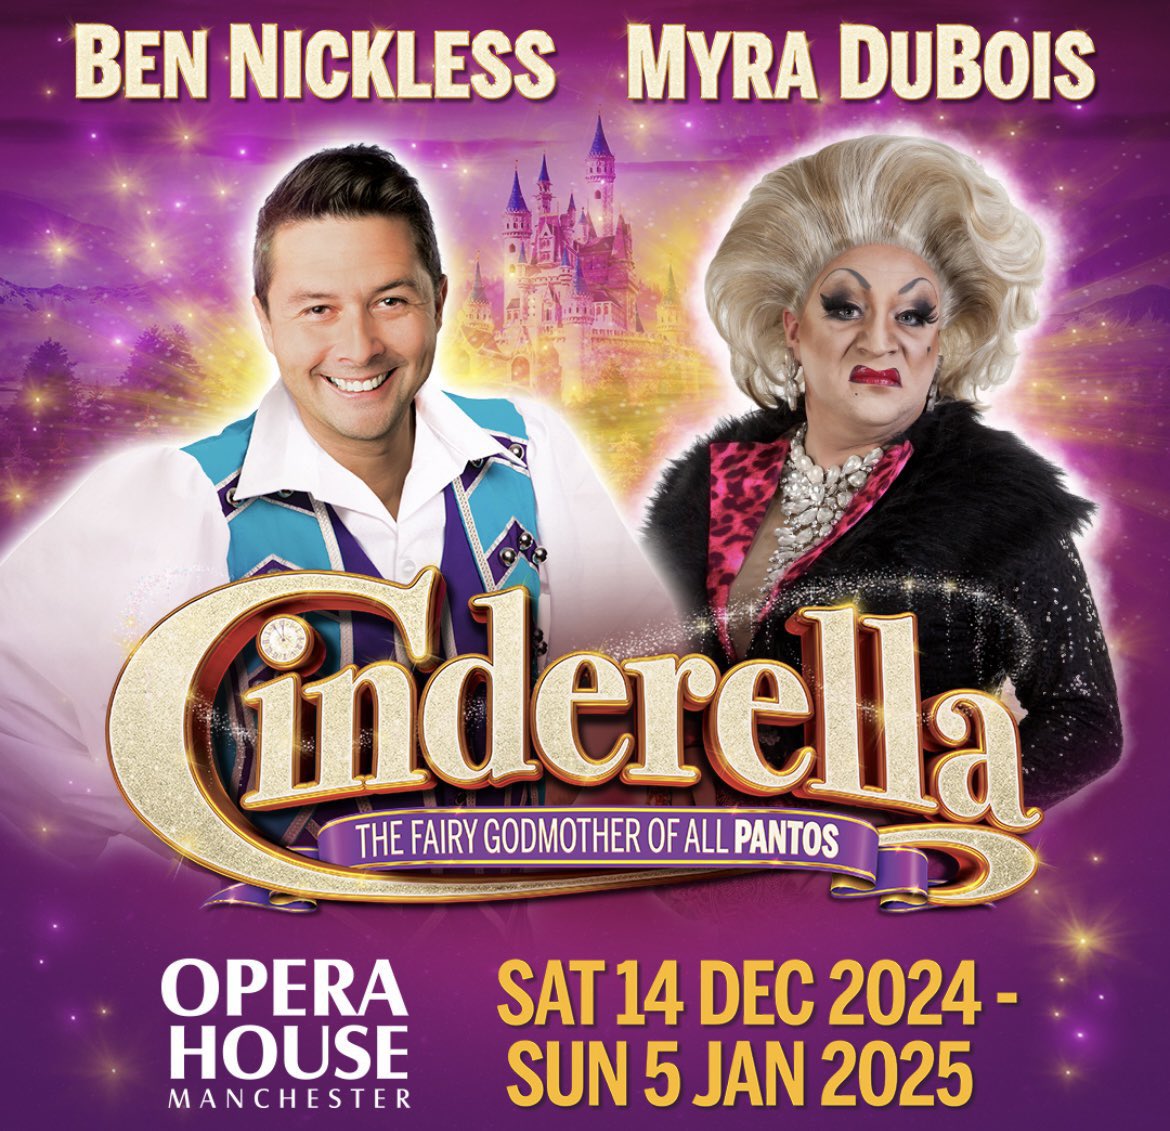 News from @PalaceAndOpera for this Christmas!